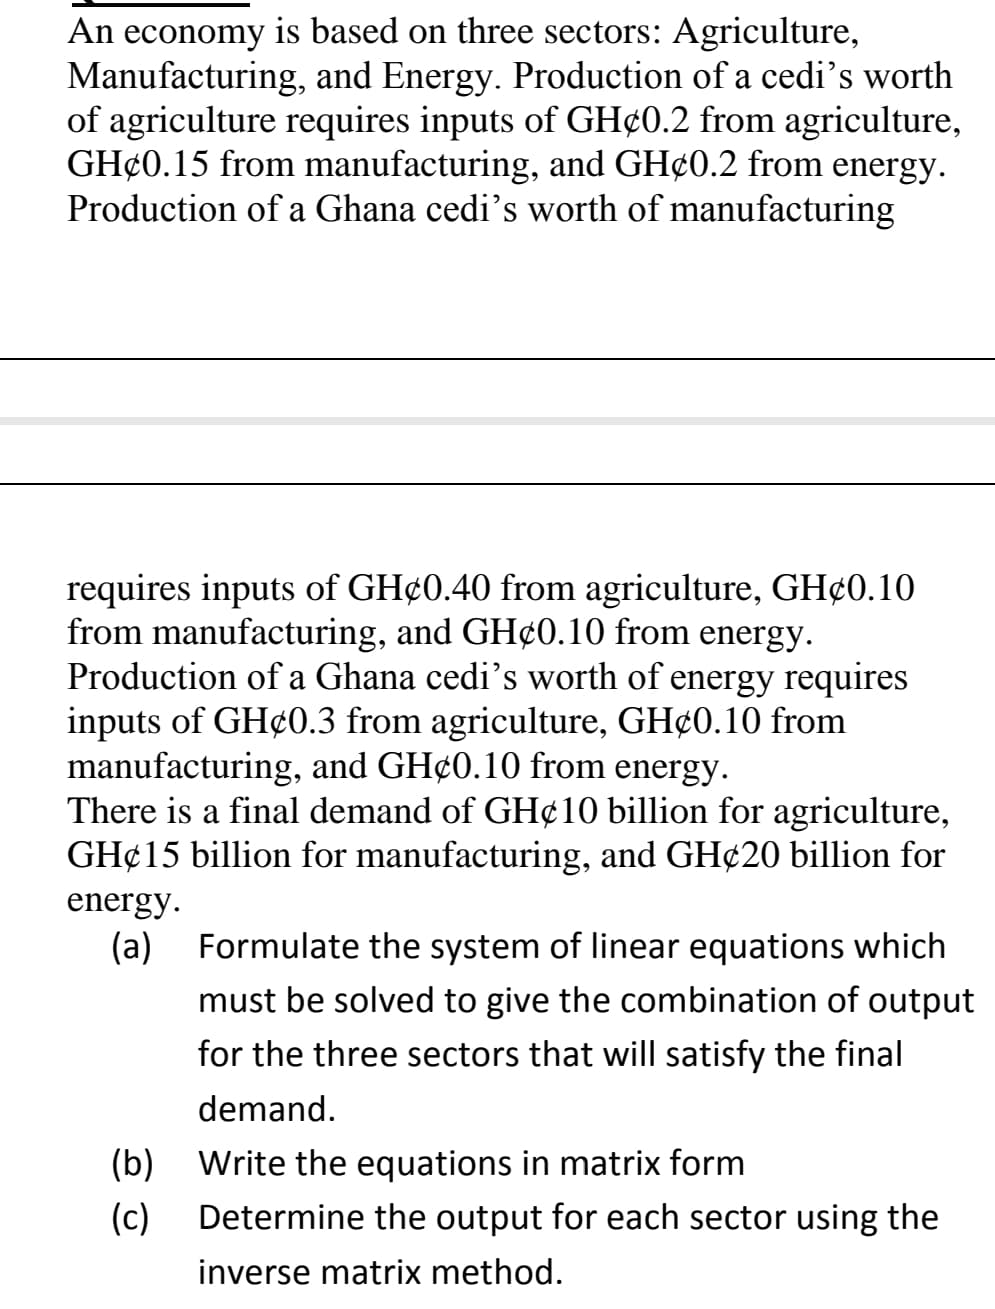 An economy is based on three sectors: Agriculture,
Manufacturing, and Energy. Production of a cedi's worth
of agriculture requires inputs of GH¢0.2 from agriculture,
GH¢0.15 from manufacturing, and GH¢0.2 from energy.
Production of a Ghana cedi’s worth of manufacturing
requires inputs of GH¢0.40 from agriculture, GH¢0.10
from manufacturing, and GH¢0.10 from energy.
Production of a Ghana cedi's worth of energy requires
inputs of GH¢0.3 from agriculture, GH¢0.10 from
manufacturing, and GH¢0.10 from energy.
There is a final demand of GH¢10 billion for agriculture,
GH¢15 billion for manufacturing, and GH¢20 billion for
energy.
(a)
Formulate the system of linear equations which
must be solved to give the combination of output
for the three sectors that will satisfy the final
demand.
(b) Write the equations in matrix form
(c)
Determine the output for each sector using the
inverse matrix method.
